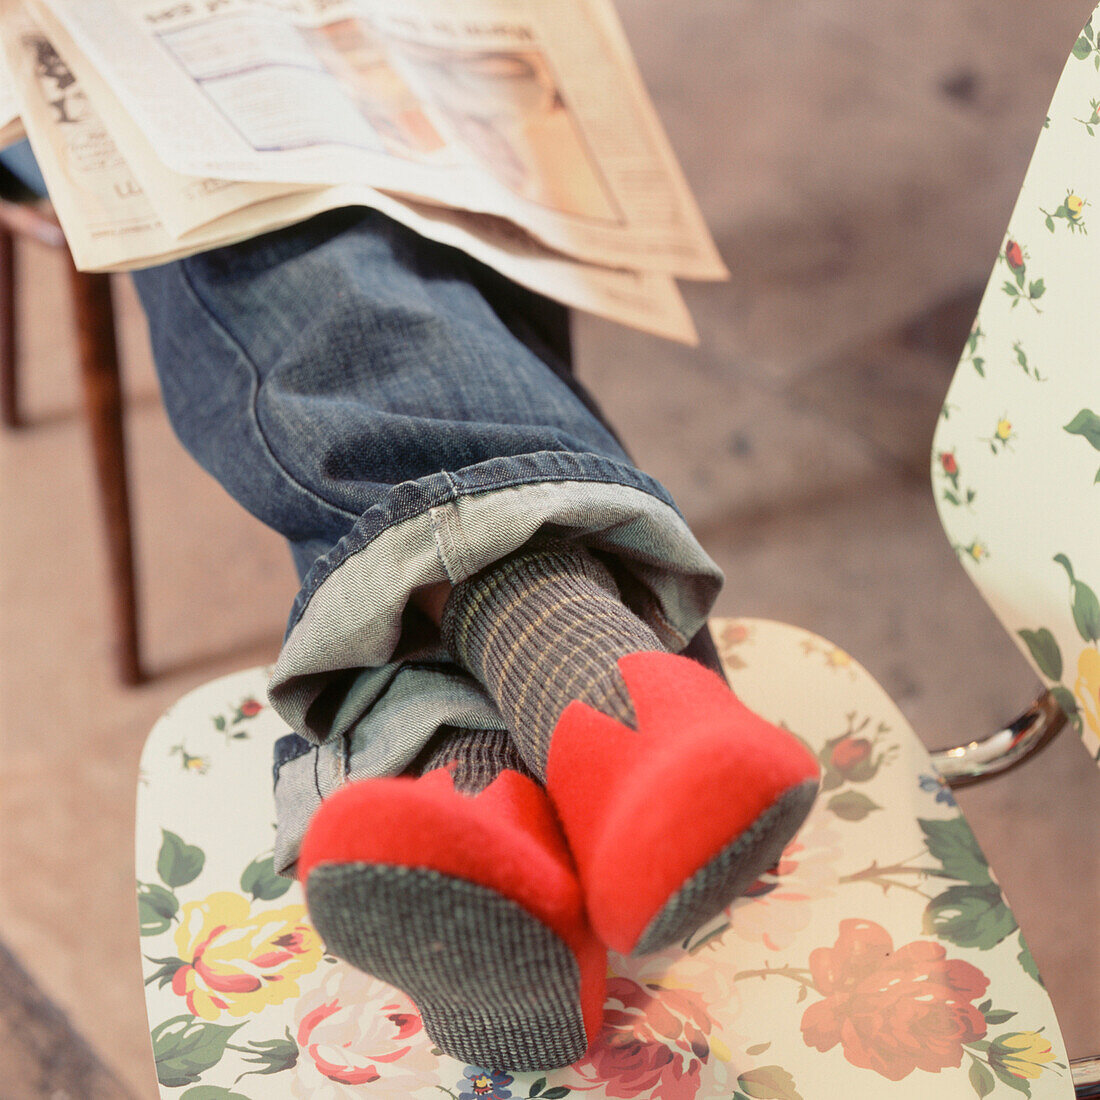 Person sitting with slippers on with legs up on a chair reading a newspaper